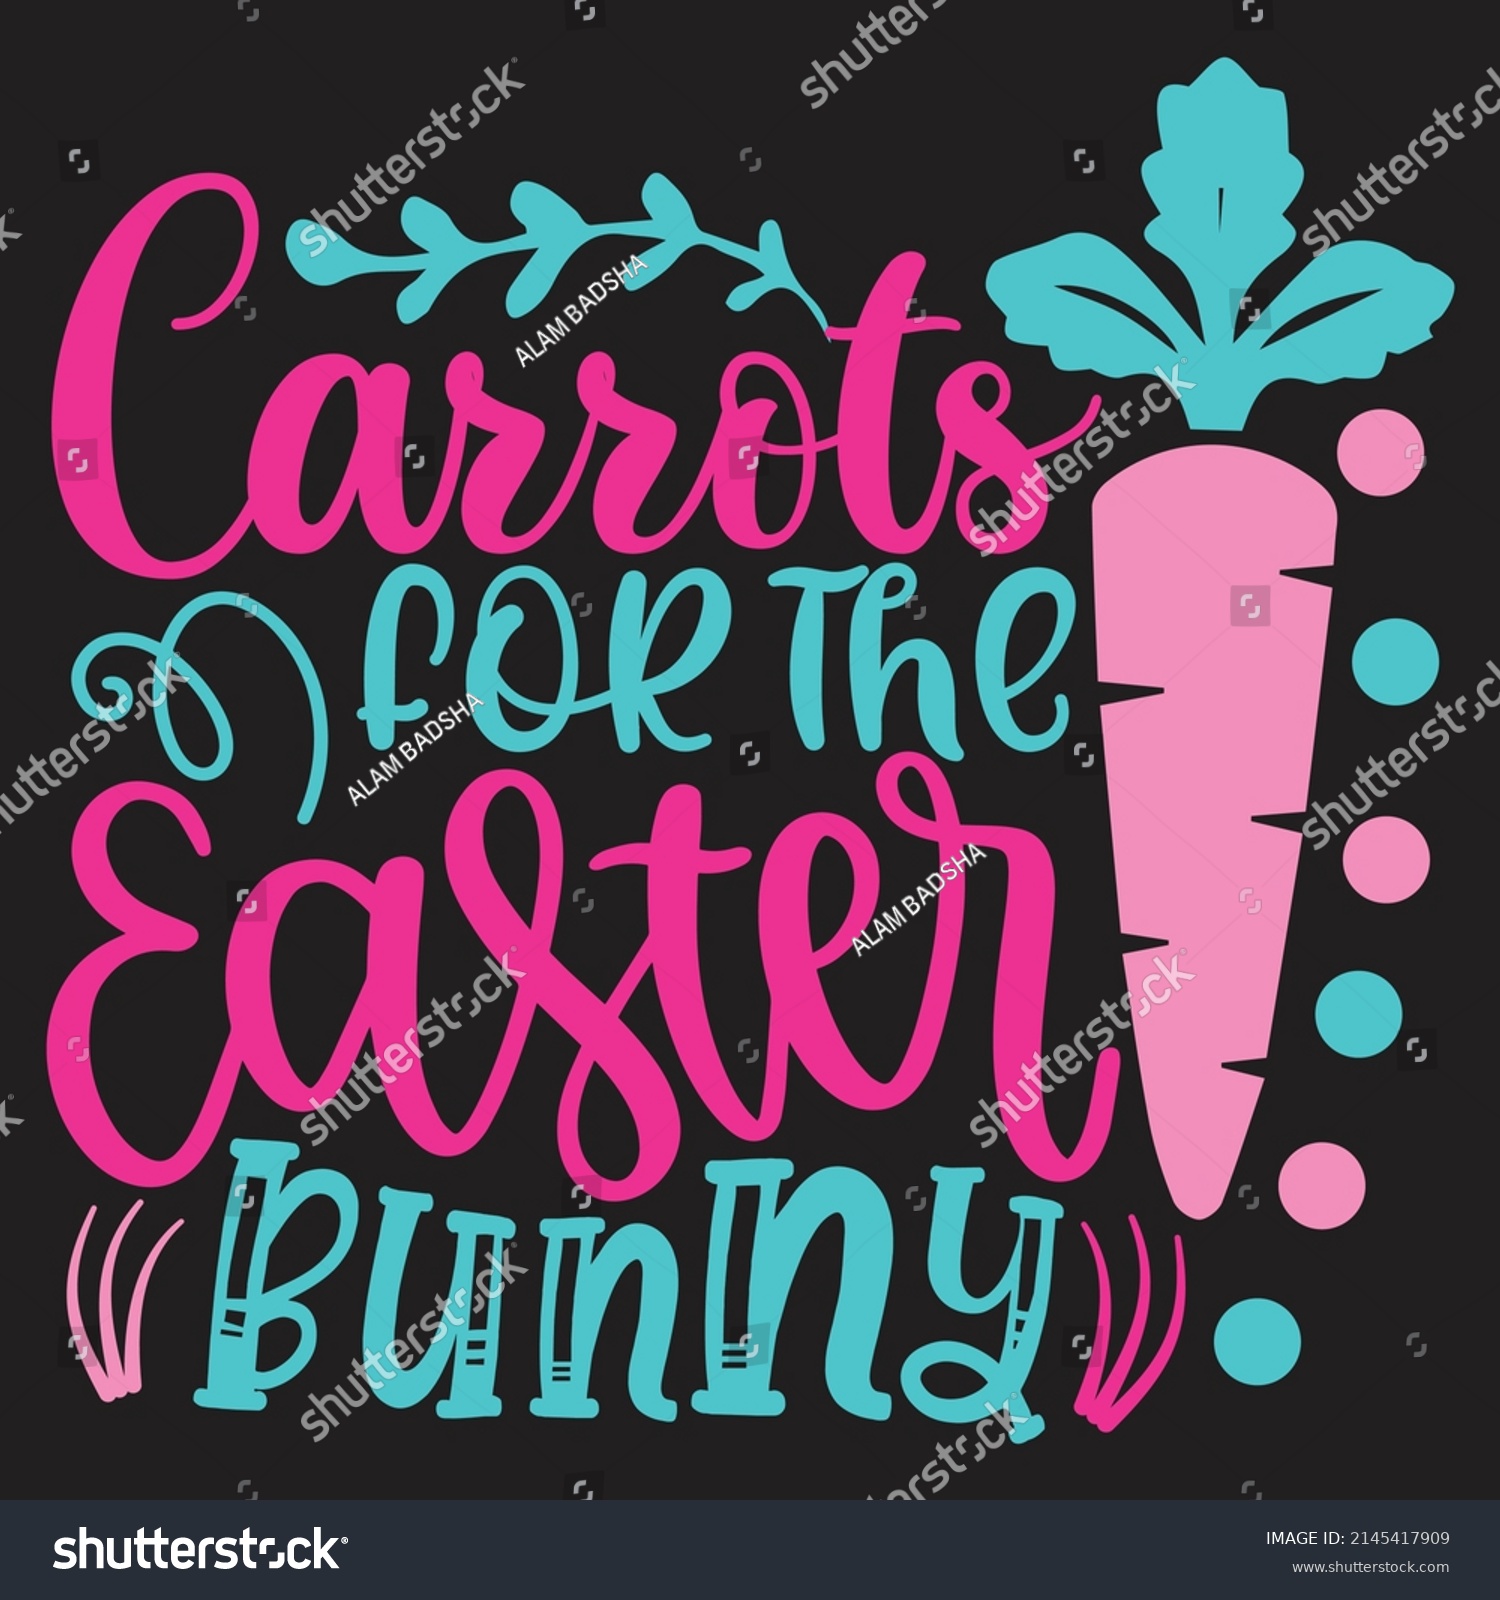 SVG of Carrots For The Easter Bunny - Happy Easter T-shirt And SVG Design, vector File. svg